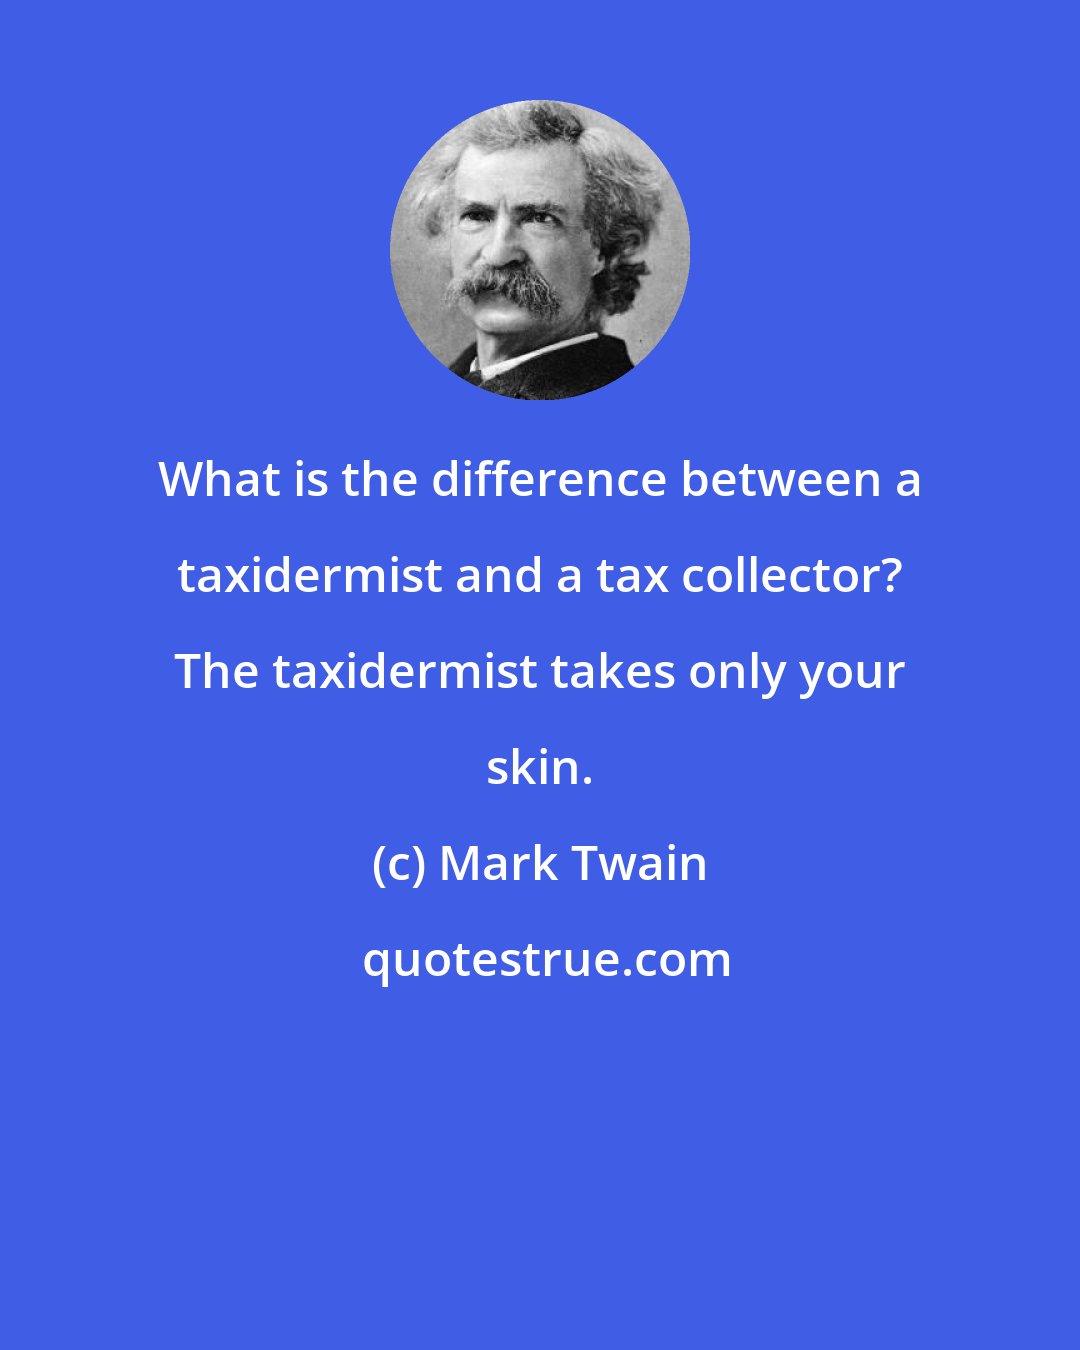 Mark Twain: What is the difference between a taxidermist and a tax collector? The taxidermist takes only your skin.